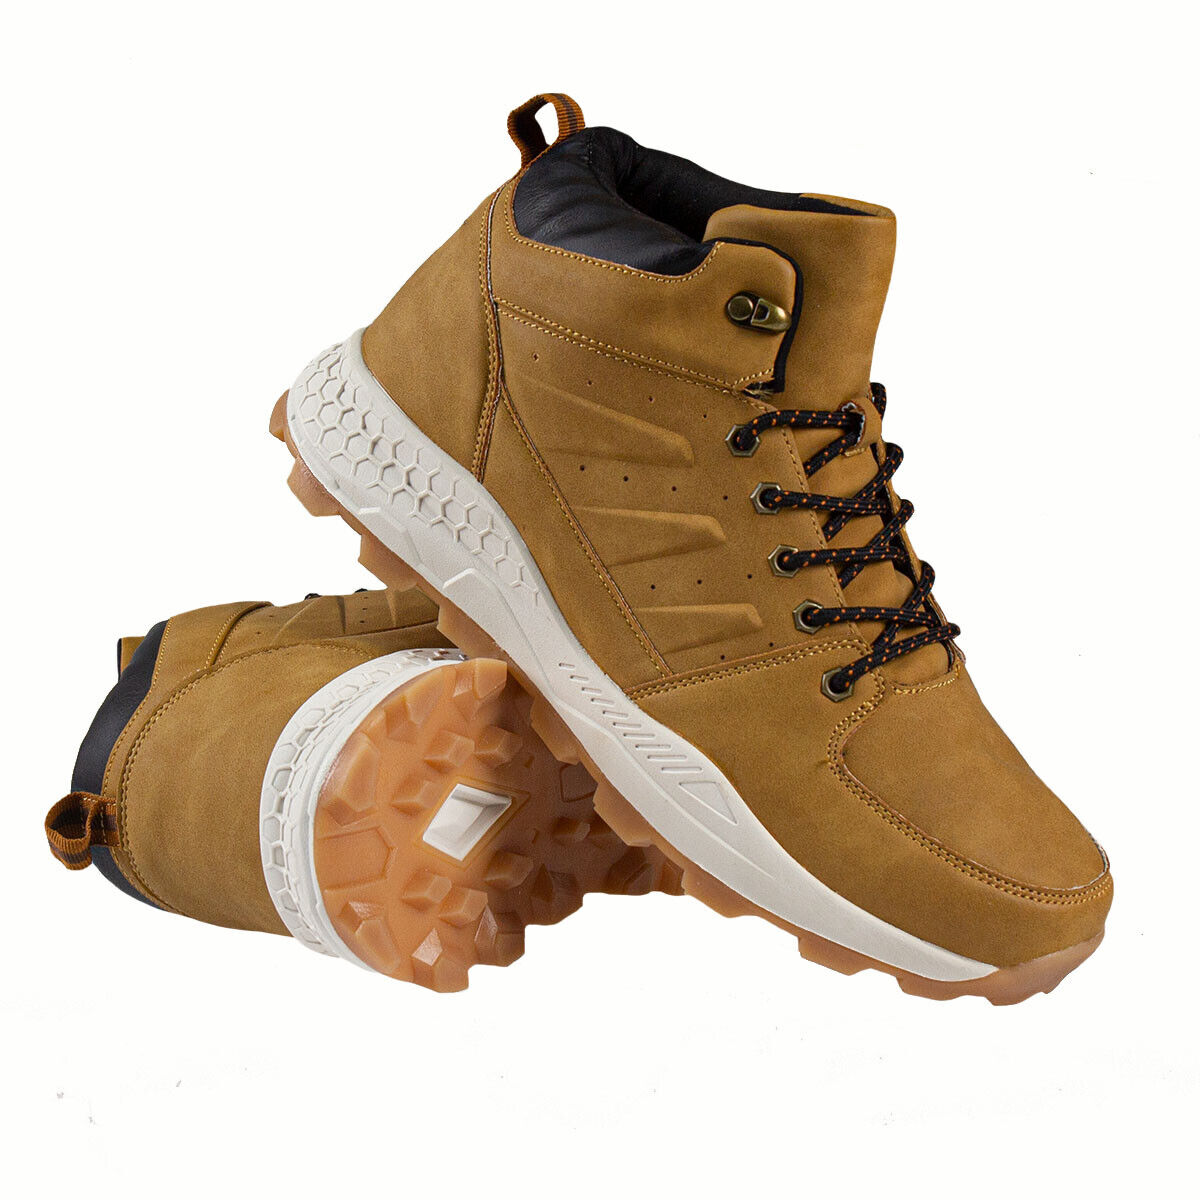 MENS HIKING BOOTS COMBAT WALKING ANKLE WINTER SHOES TRAIL TREKKING ...